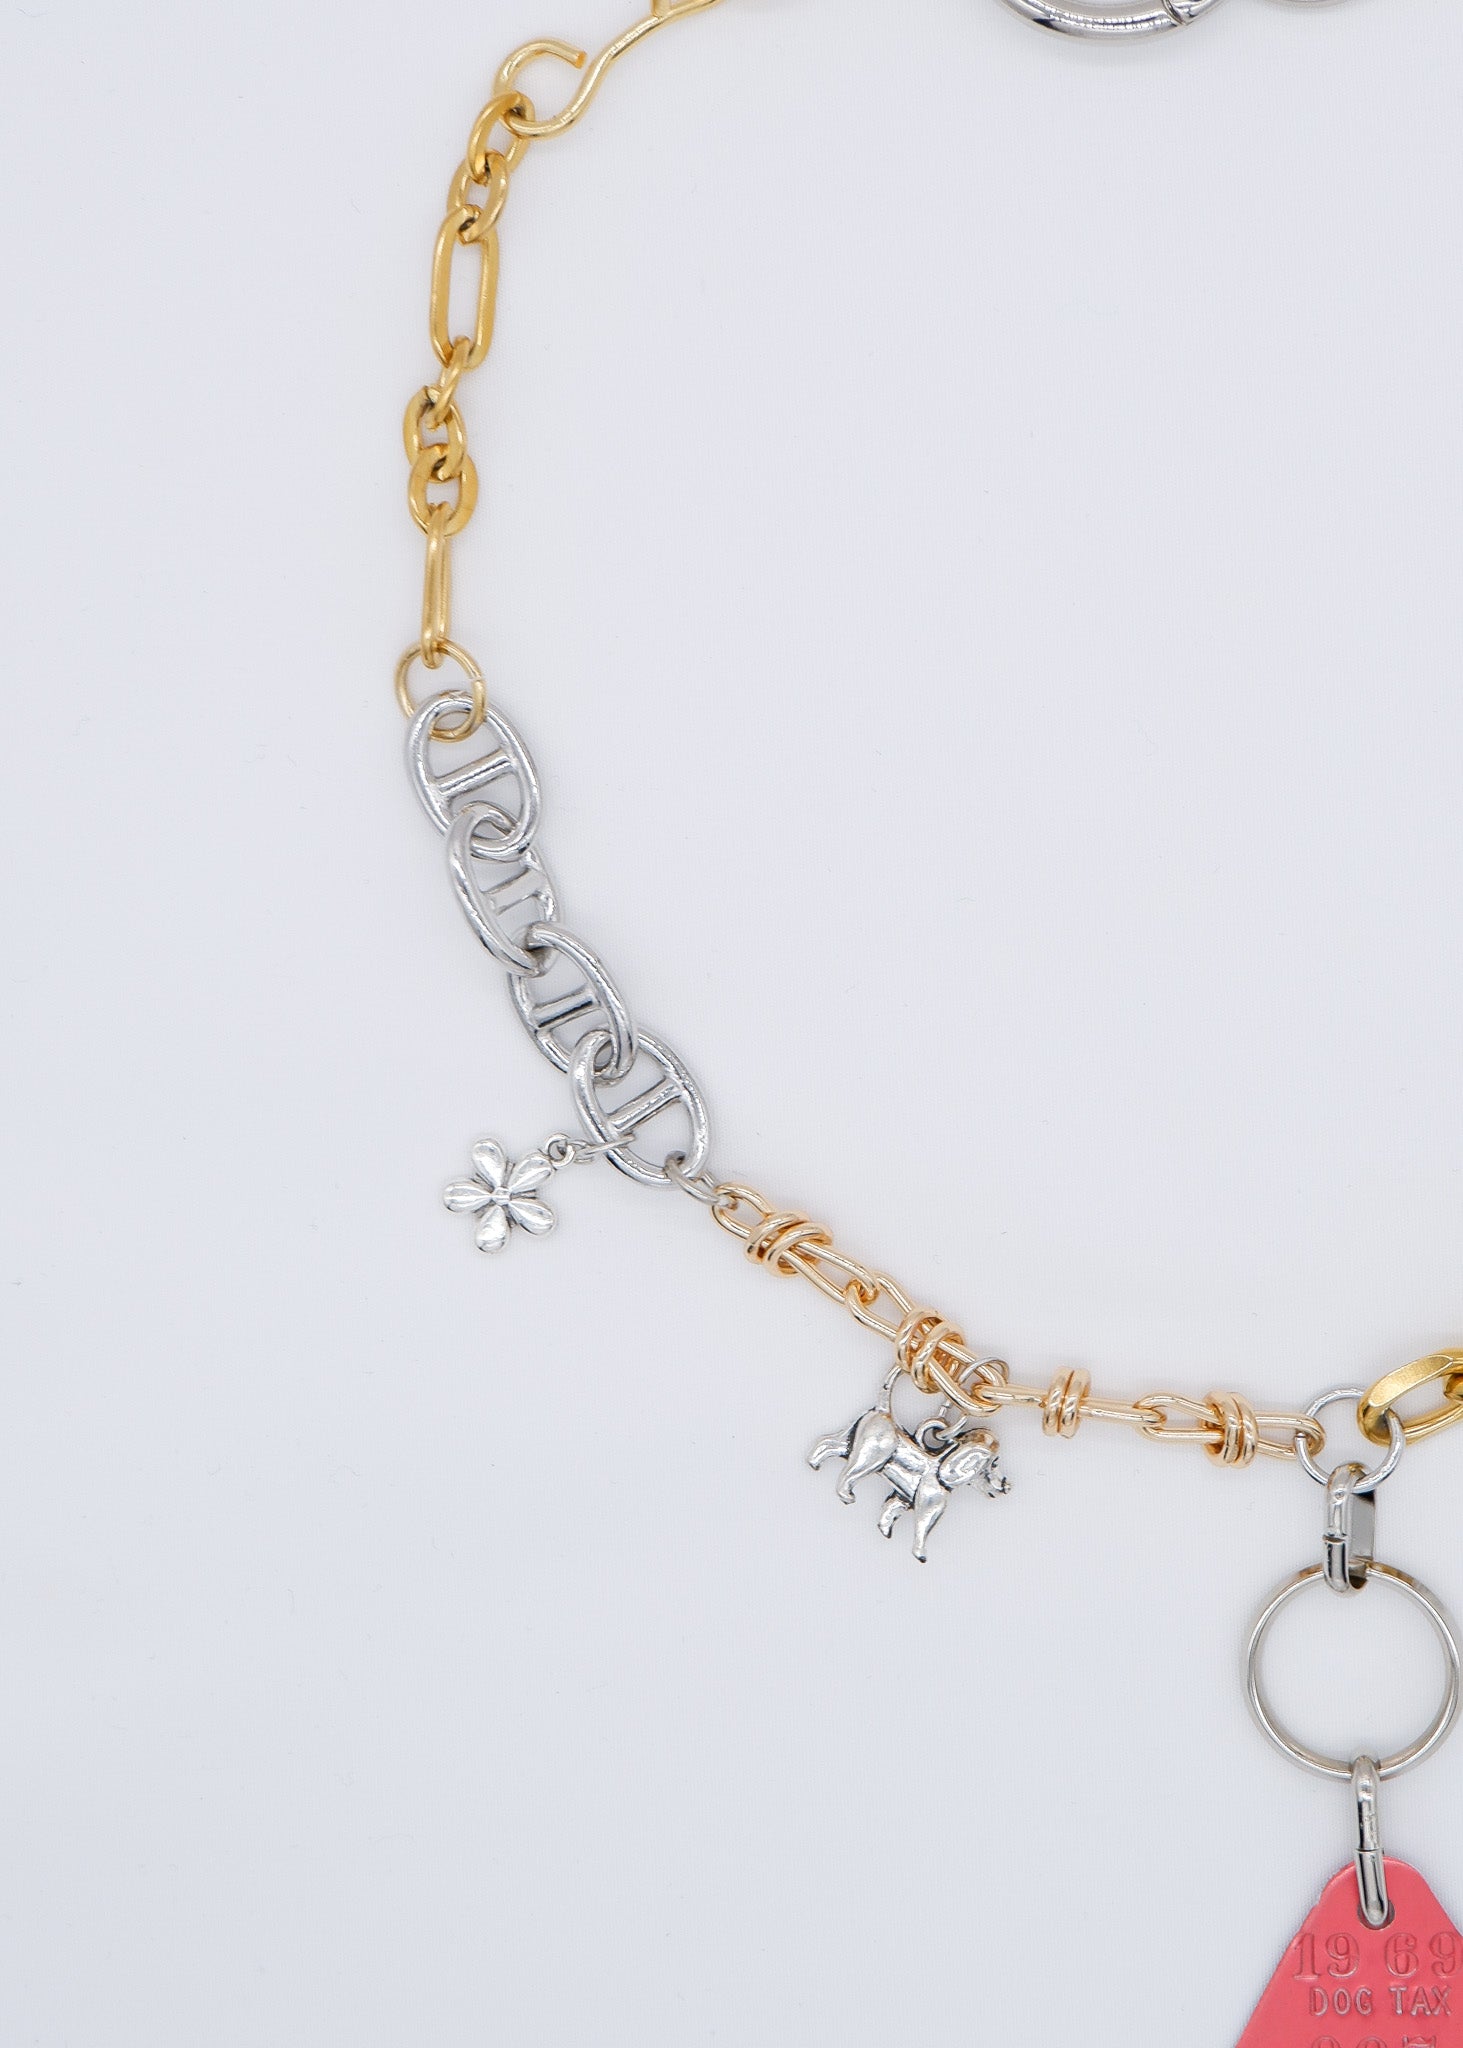 Limited charm necklace 1969